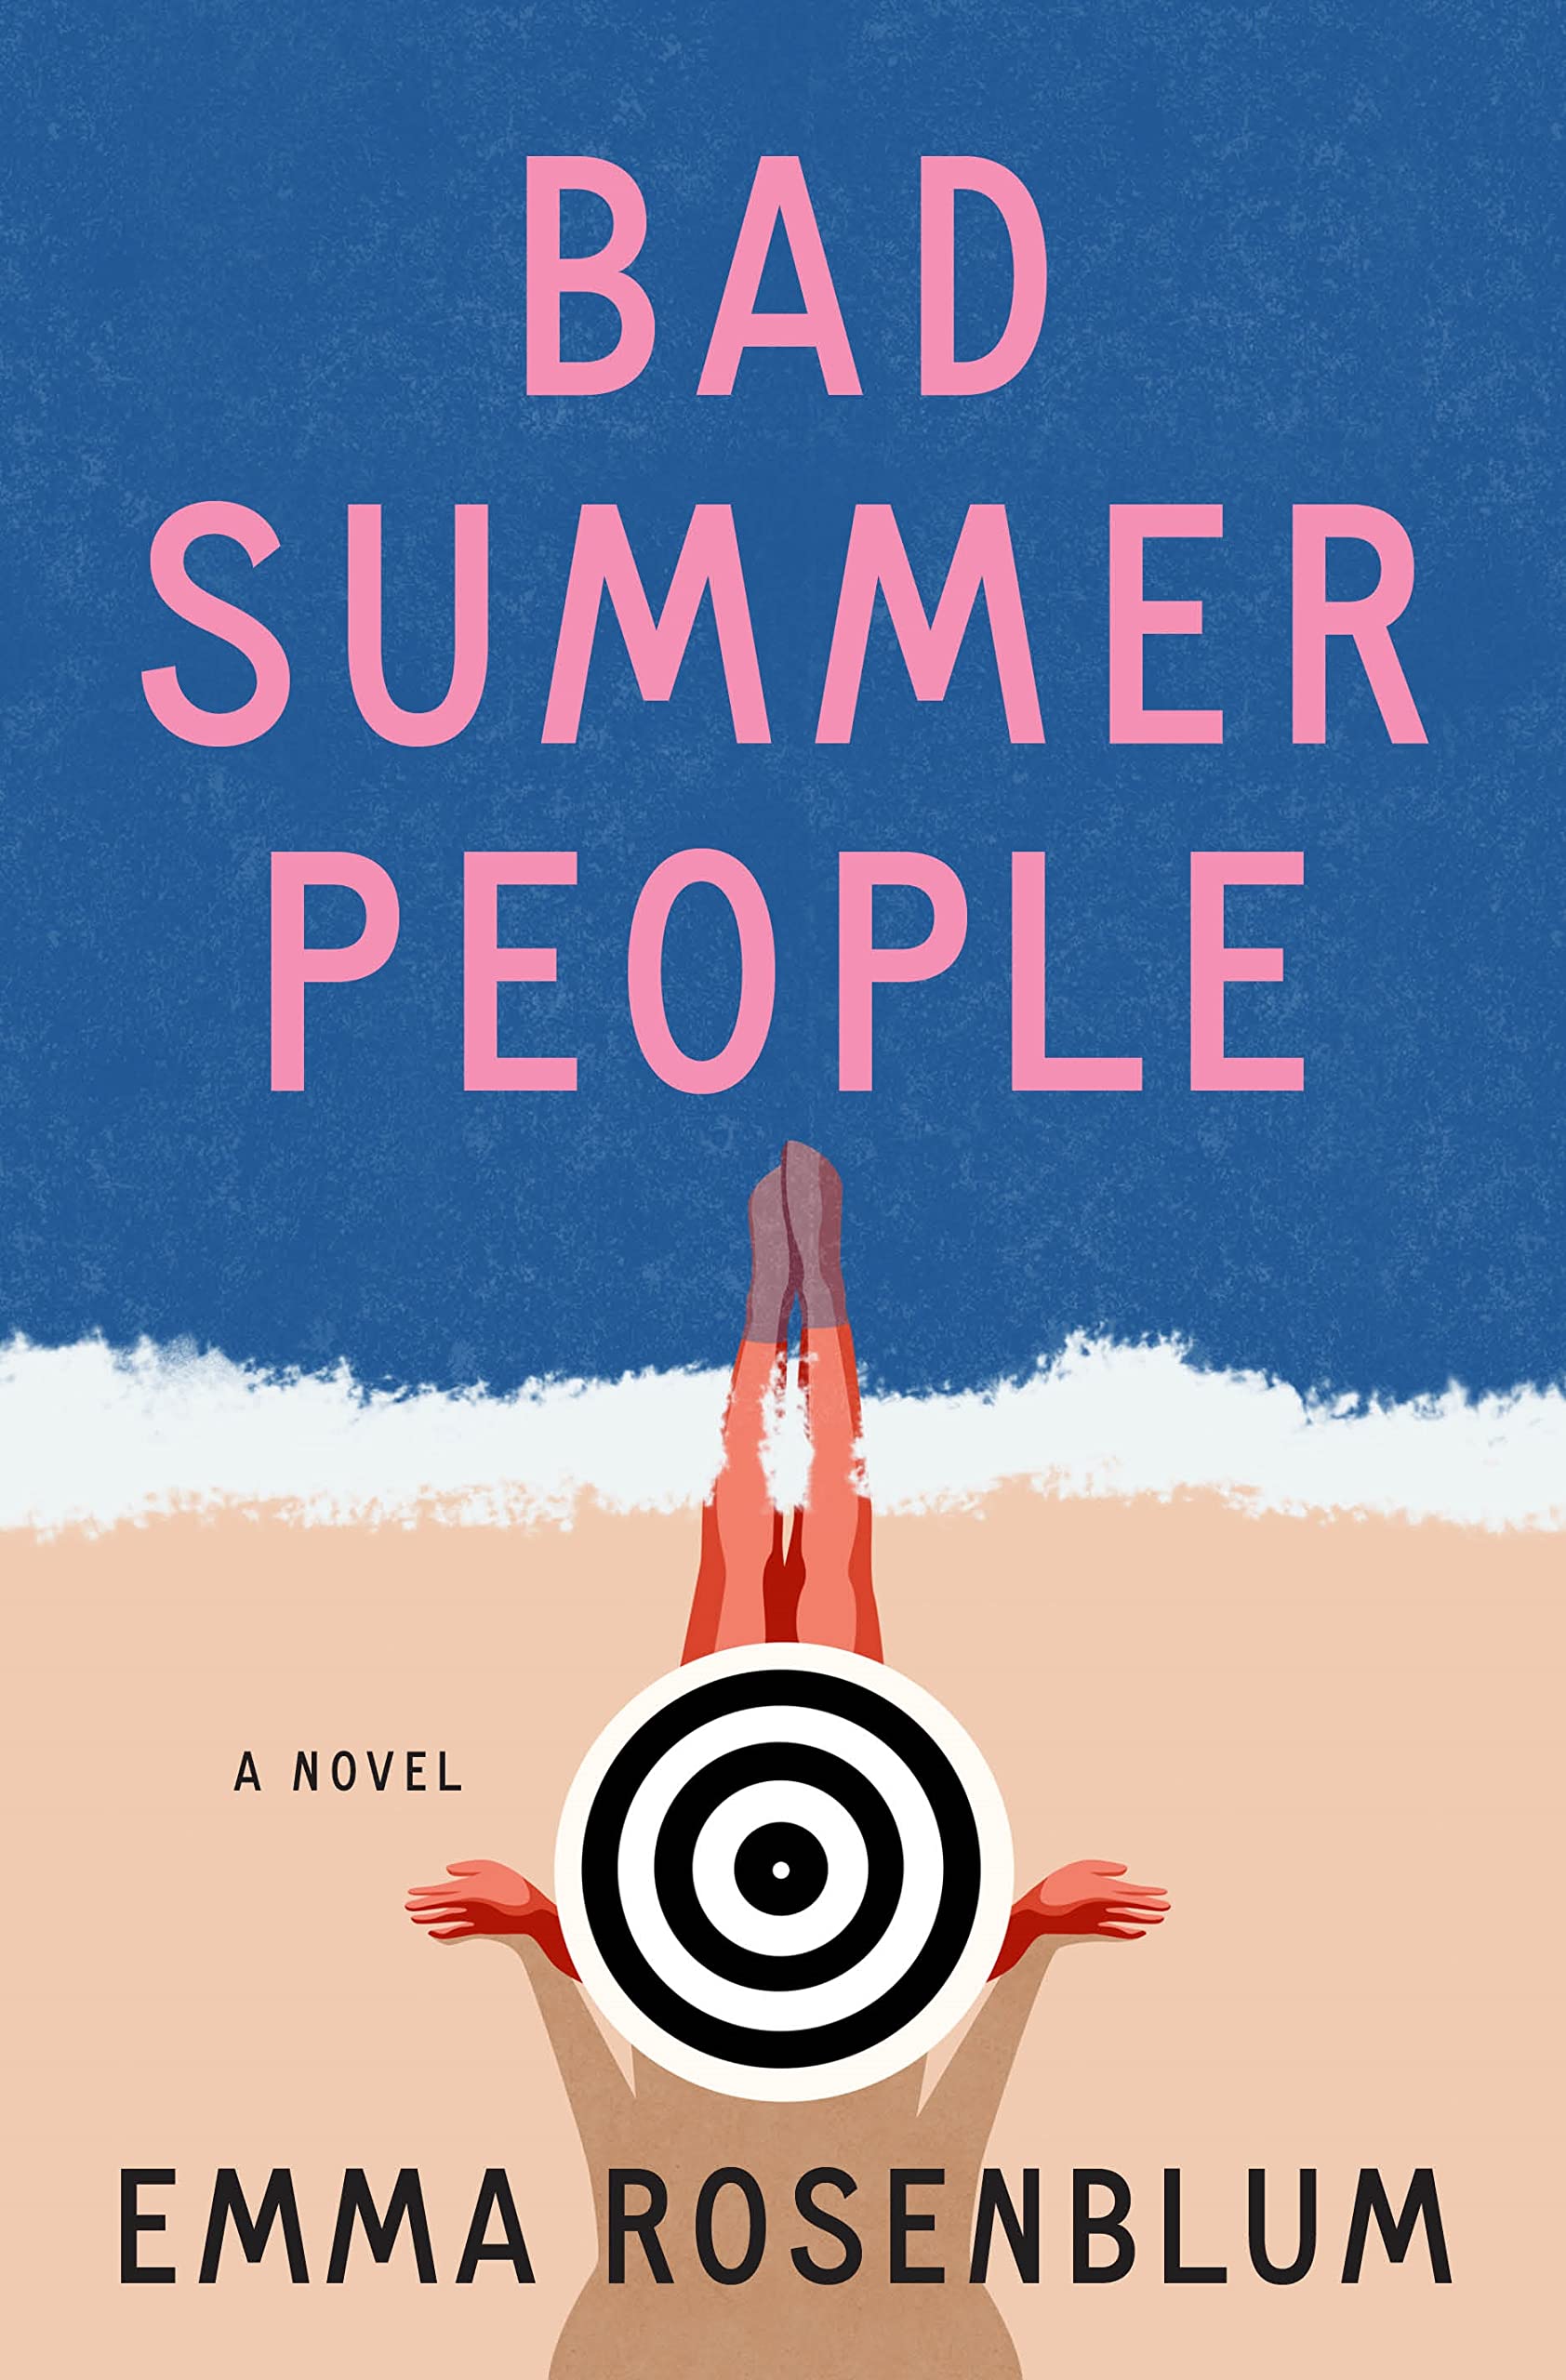 Image for "Bad Summer People"